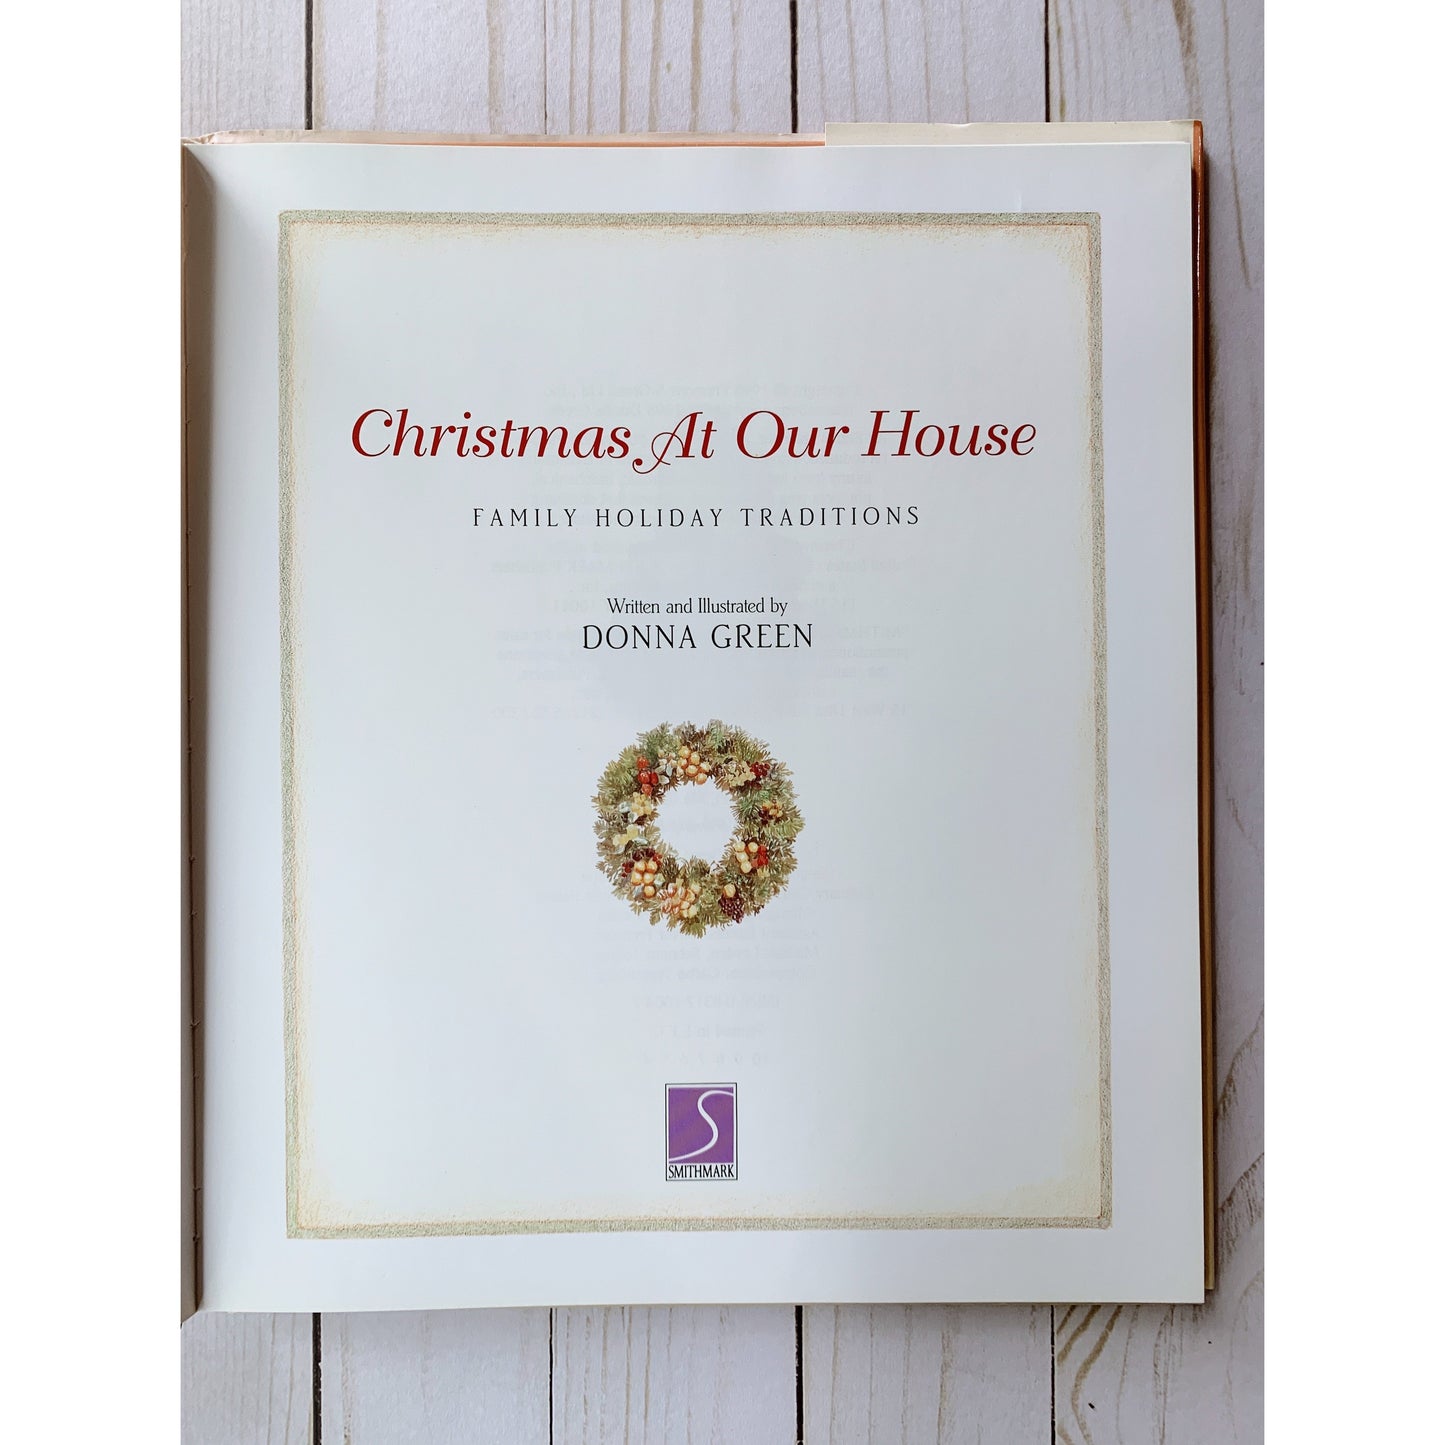 Christmas At Our House - Family Holiday Traditions - Hardcover Memory Book